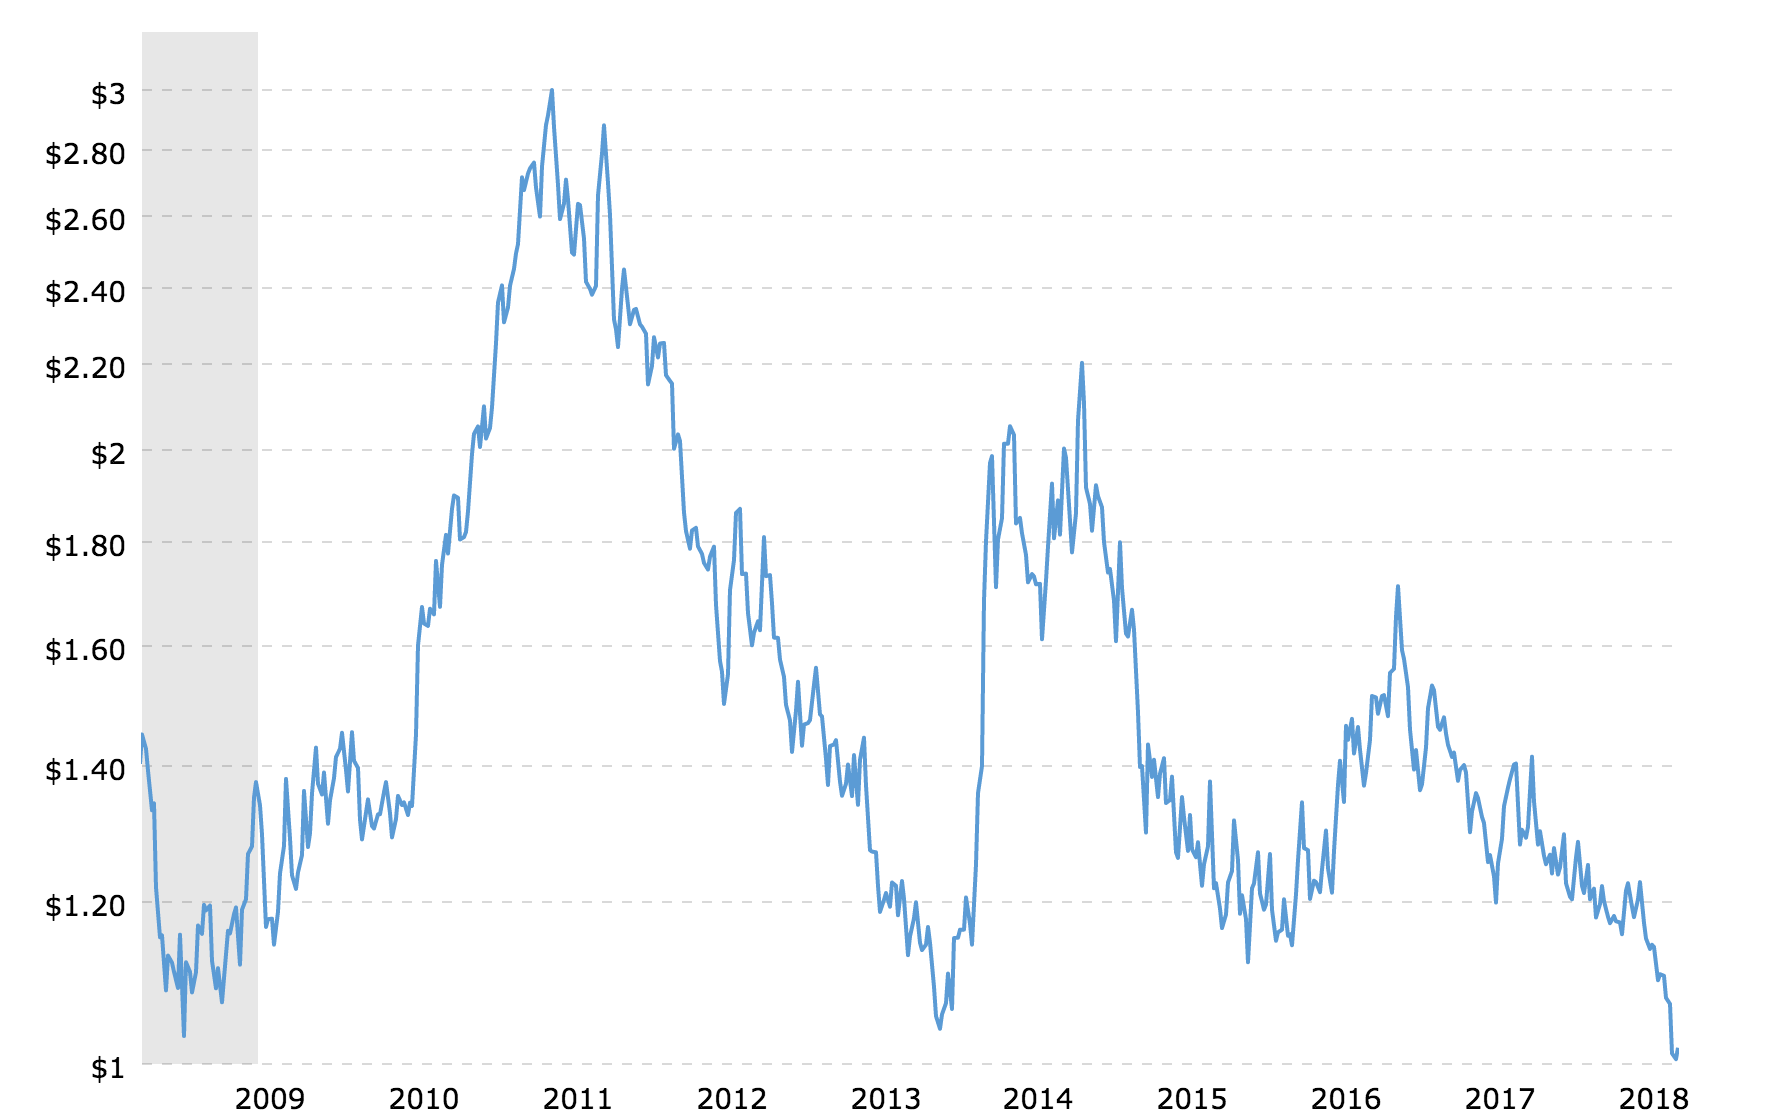 coffee-prices-historical-chart-data-2018-08-28-macrotrends